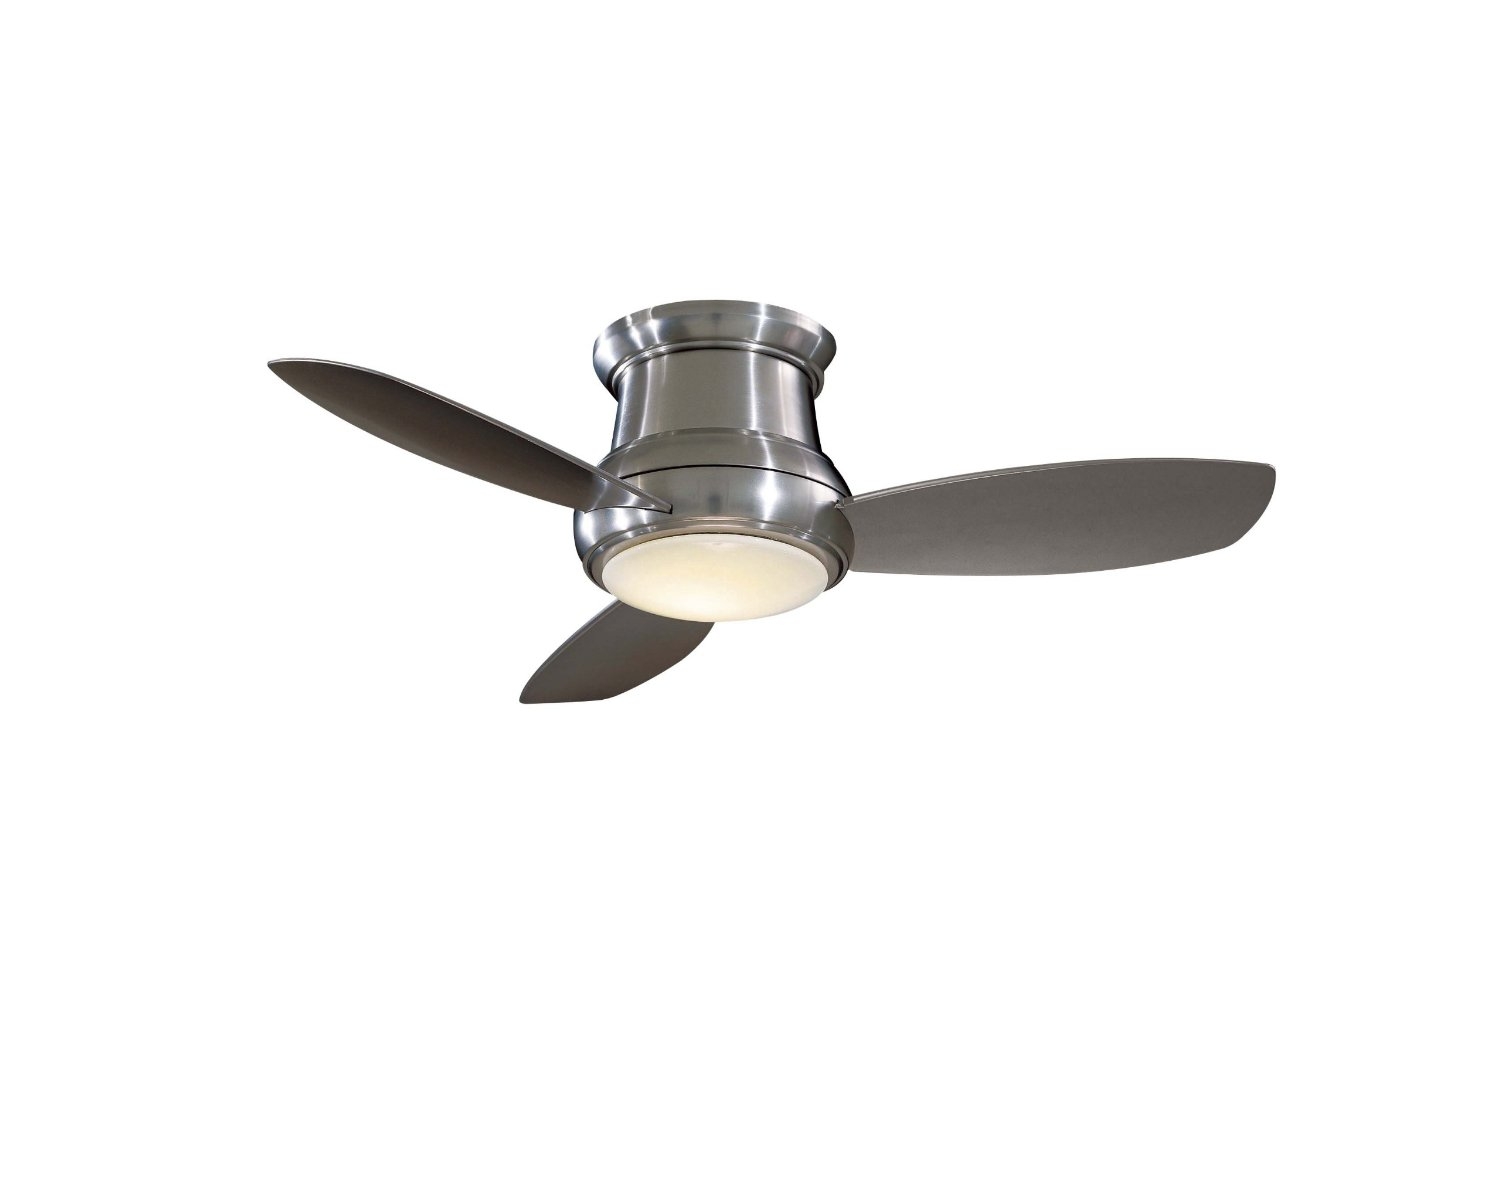 Permalink to Small Flush Mount Ceiling Fans With Lights